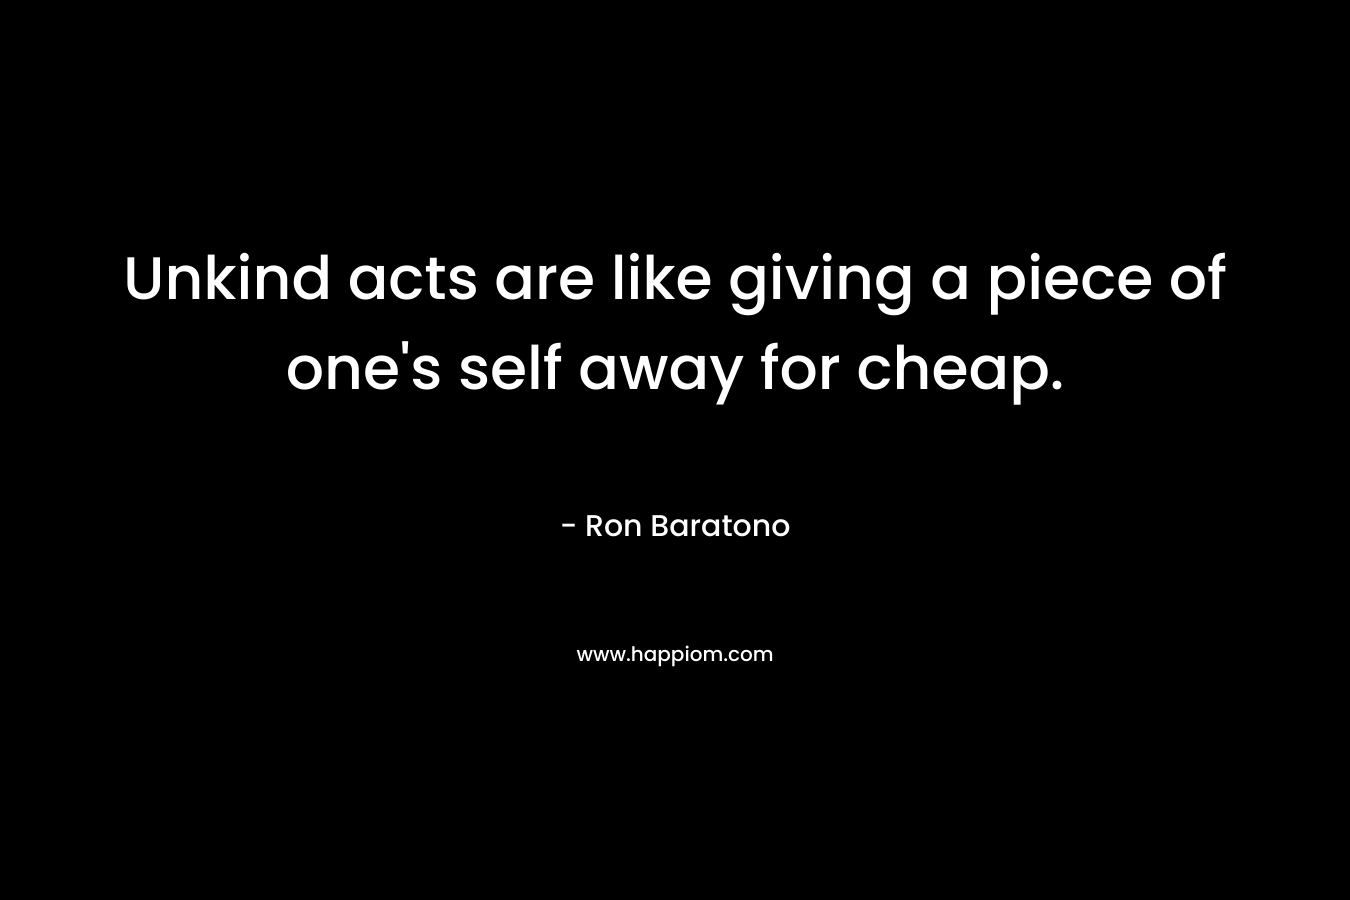 Unkind acts are like giving a piece of one's self away for cheap.